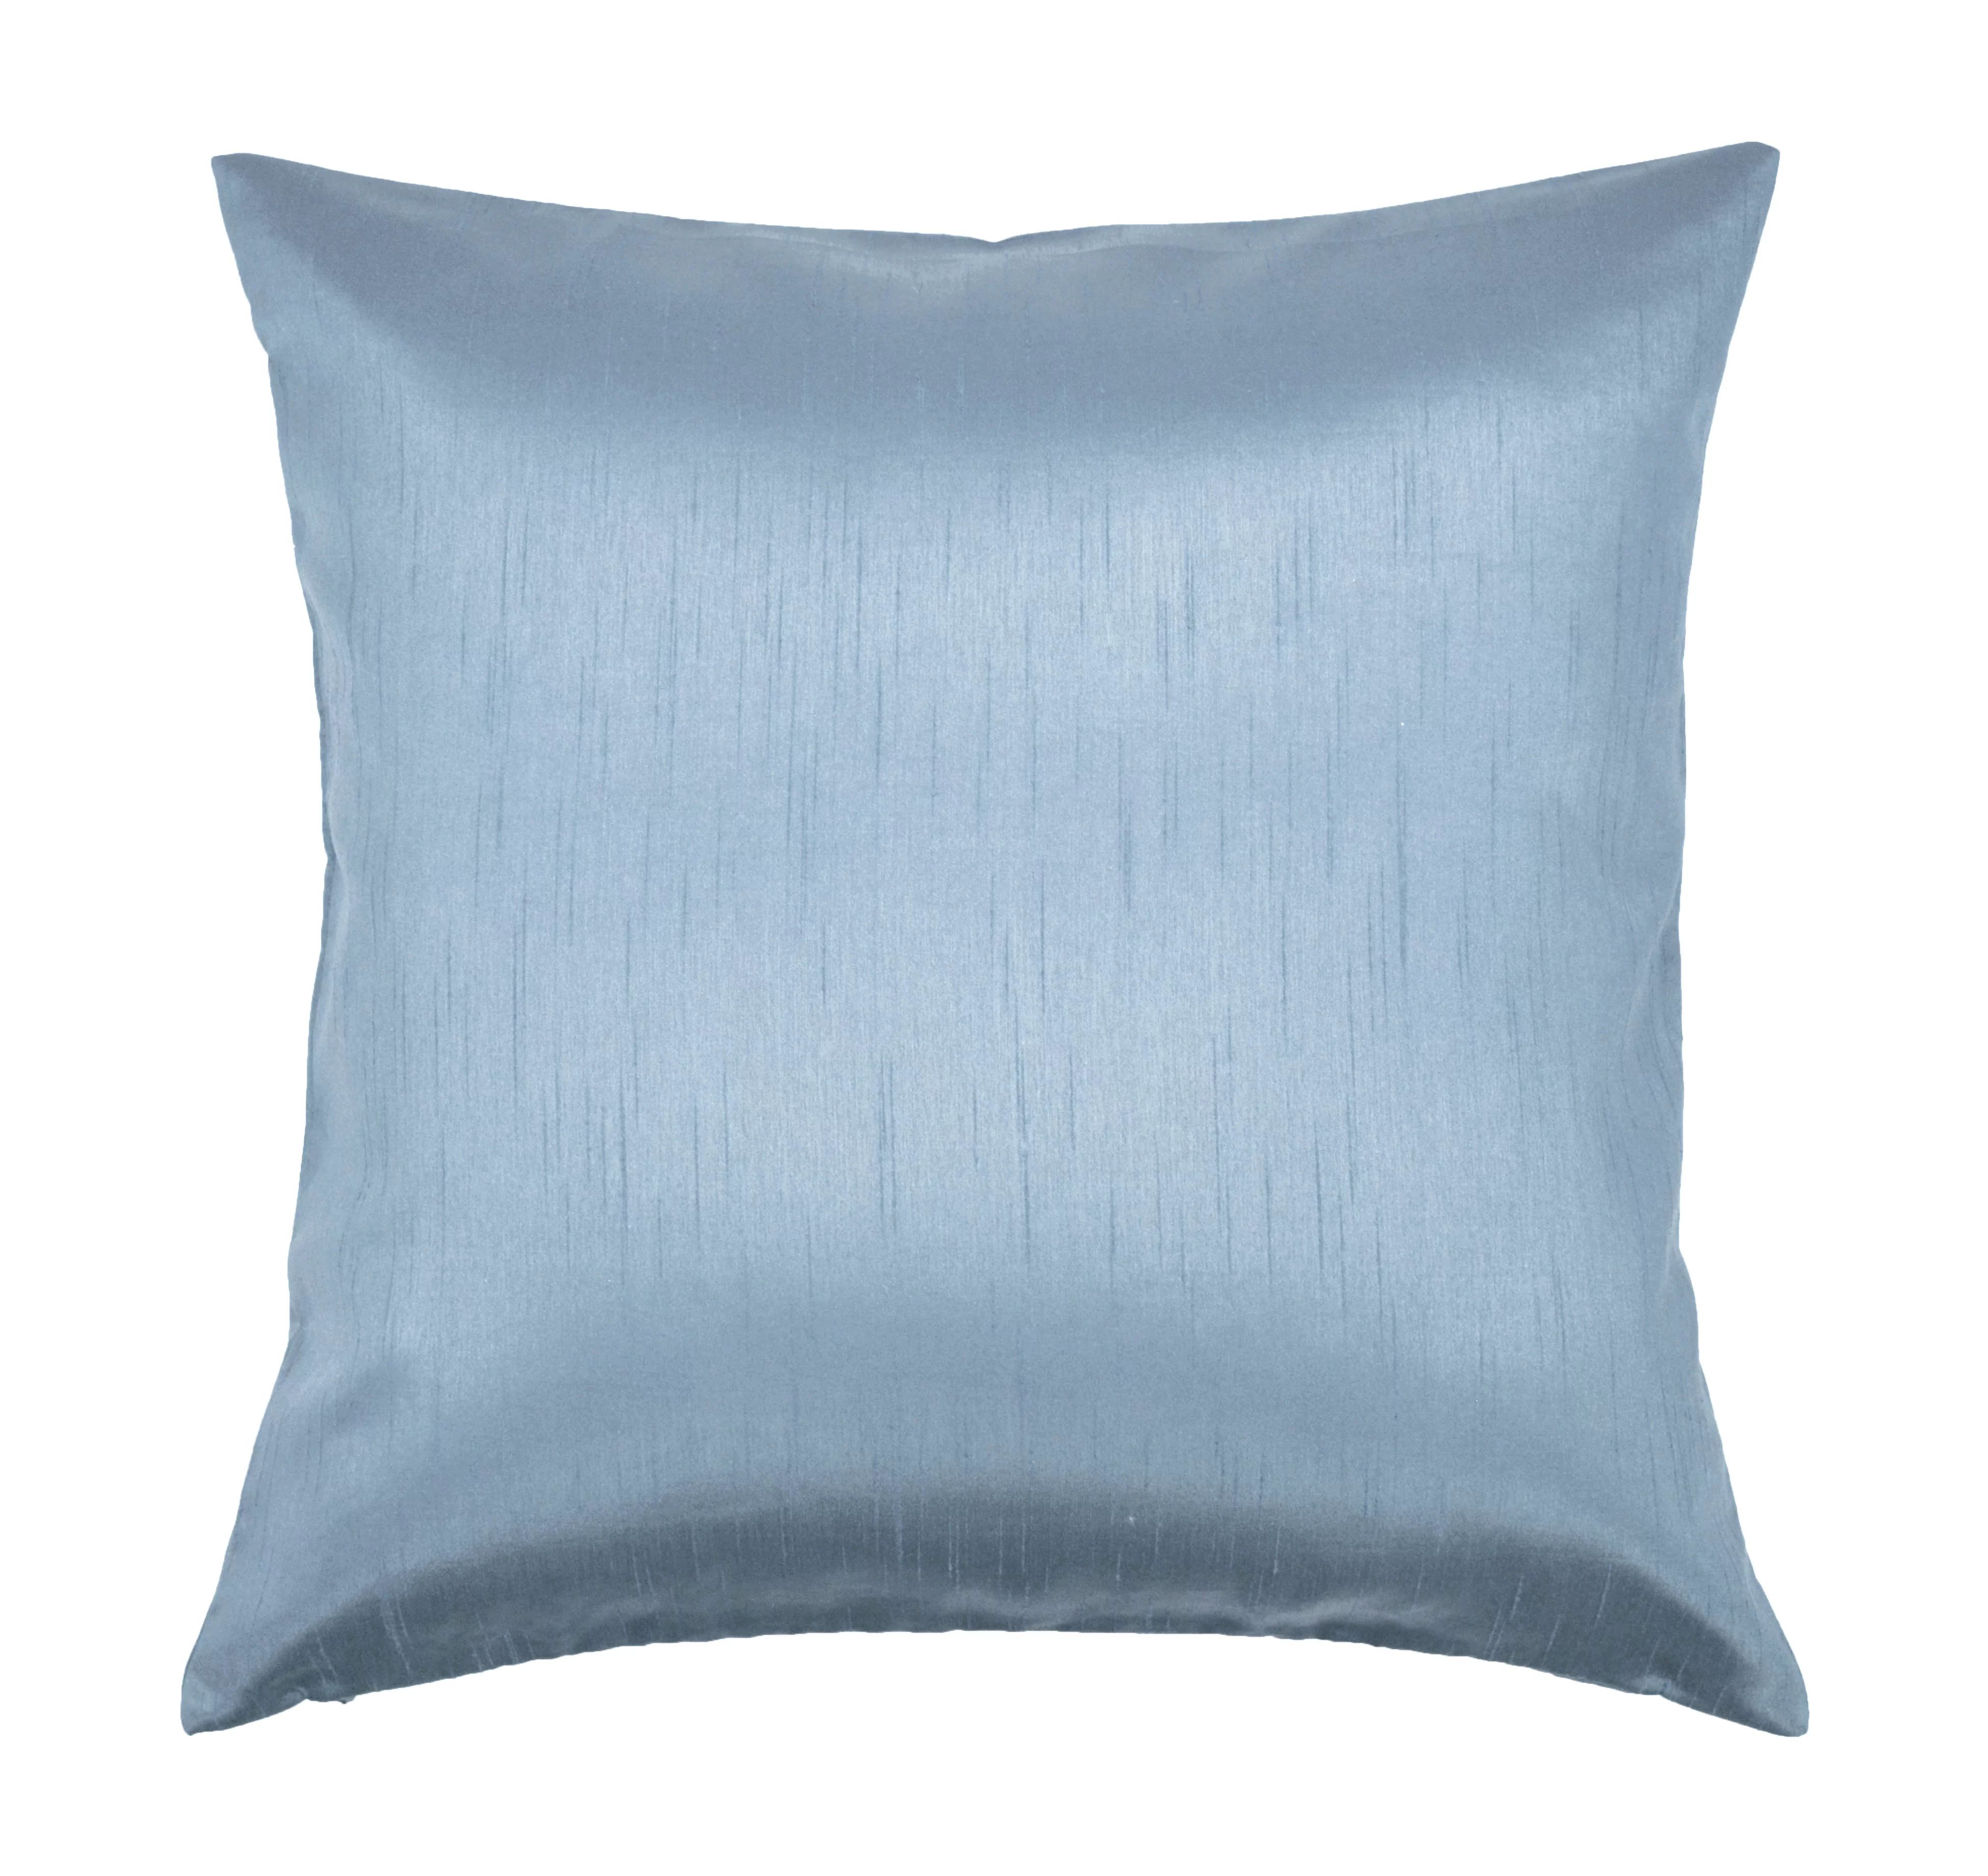 Aiking Home Solid Faux Silk Decorative Throw Pillow COVER 22 by 22 - Slate Blue | Walmart (US)